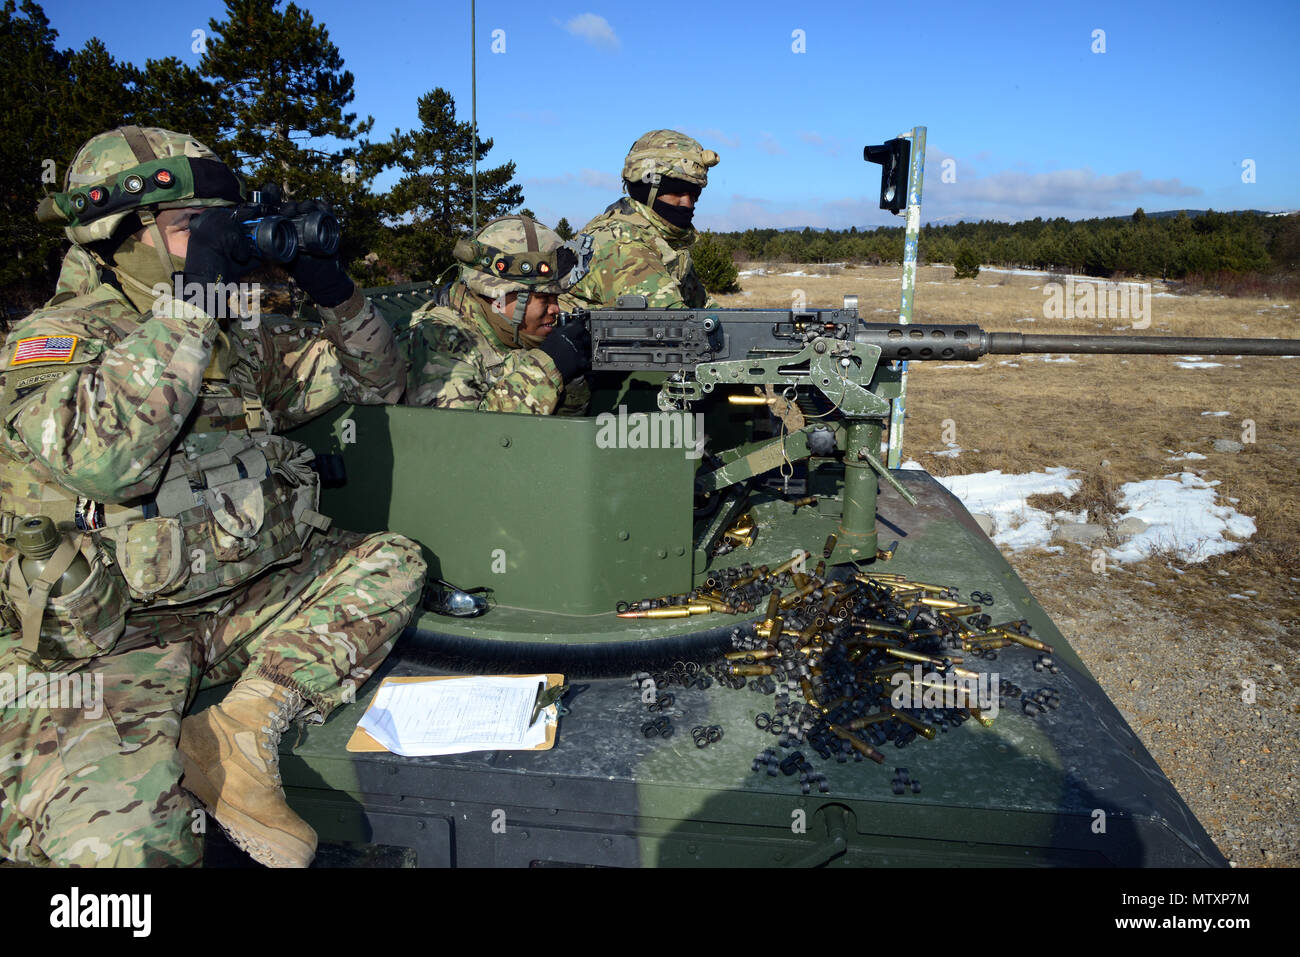 U.S. Army paratroopers from the 173rd Brigade Support Battalion, 173rd Airborne Brigade qualify with the .50-caliber machine gun during Exercise Lipizzaner III in Bac, Slovenia, on Jan. 25, 2017. Lipizzaner is a combined squad-level training exercise in preparation for platoon evaluation, and to validate battalion-level deployment procedures. (U.S. Army photo by Visual Information Specialist Massimo Bovo/Released) Stock Photo